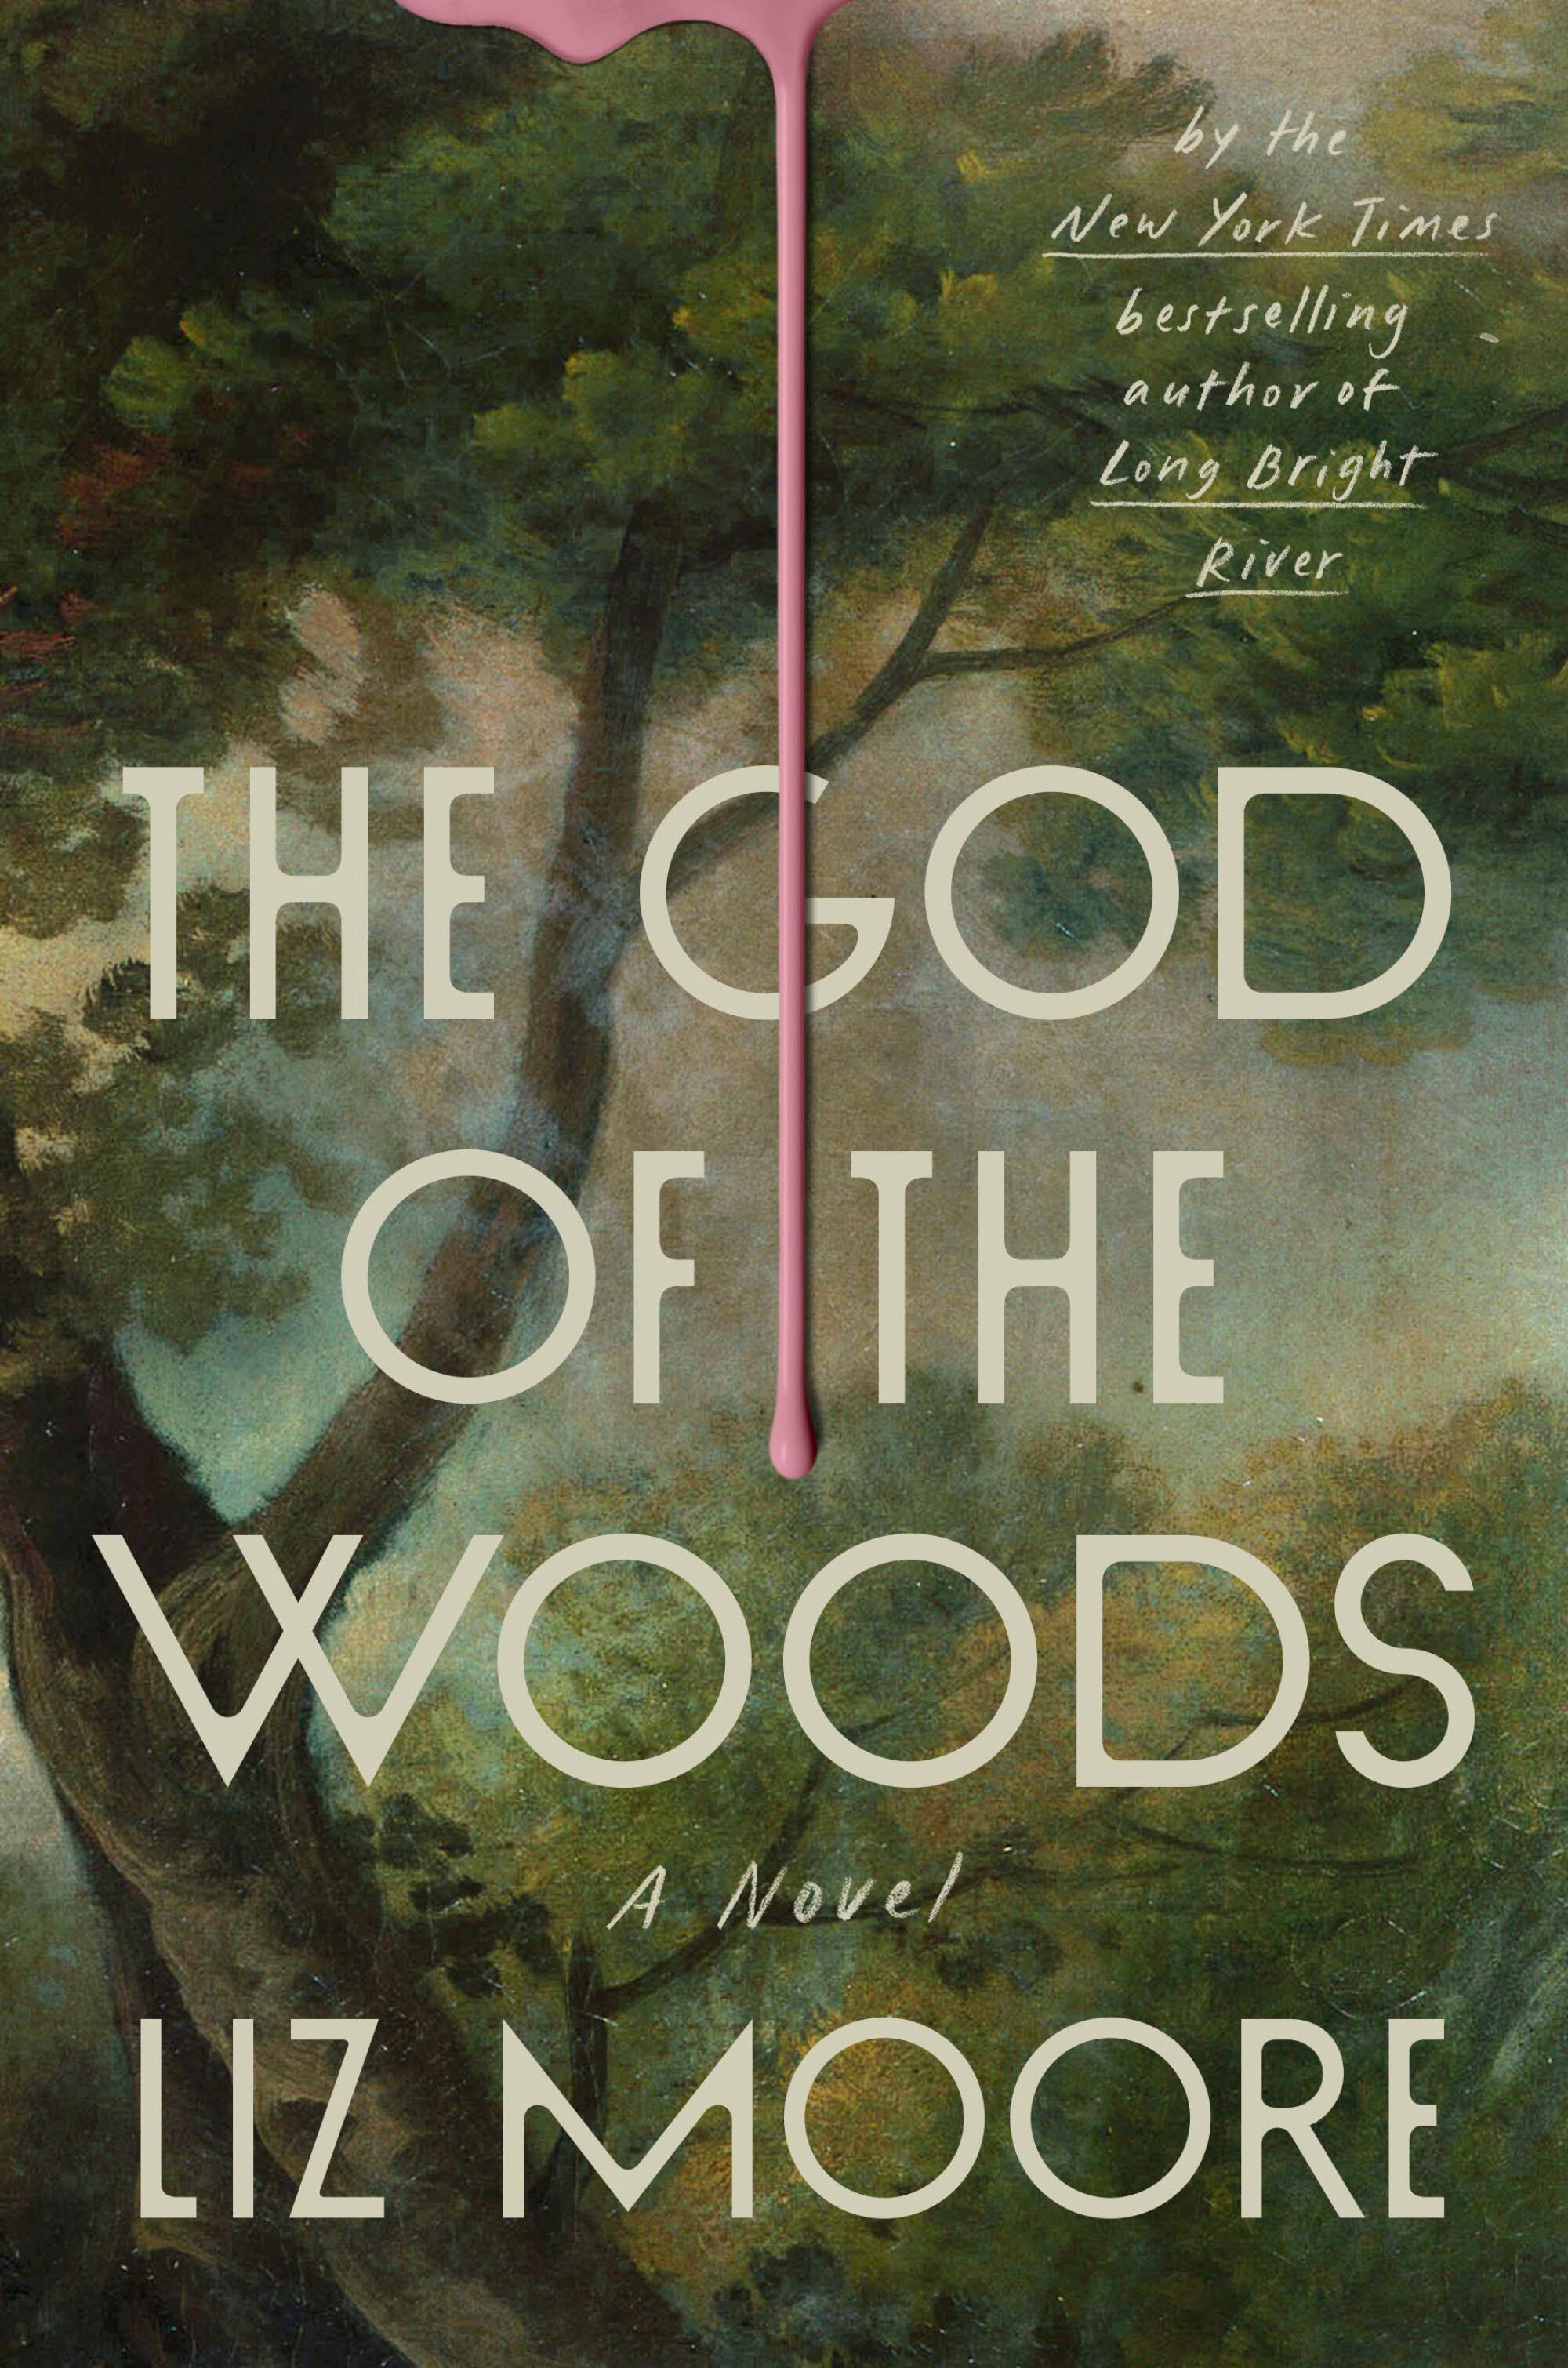 "The God of the Woods" by Liz Moore